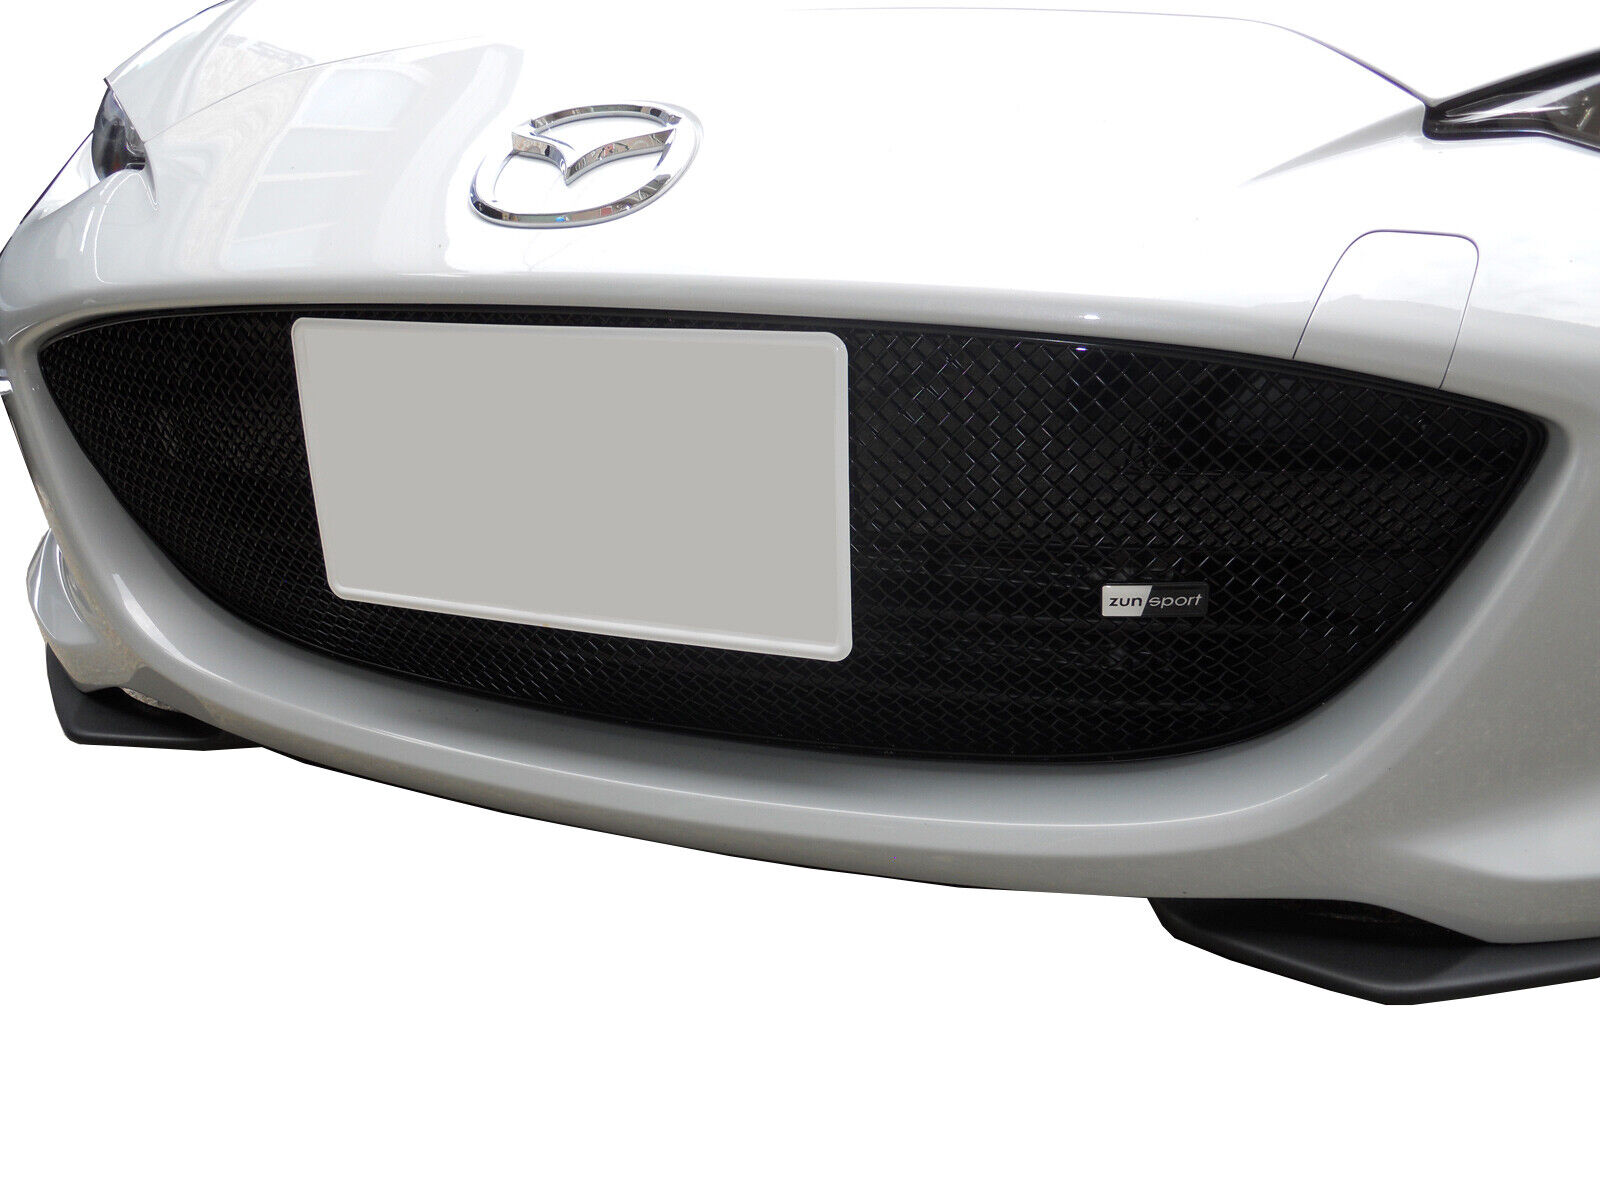 Zunsport Compatible With Mazda MX5 MK4 ND - Full Lower Grill - Black Finish